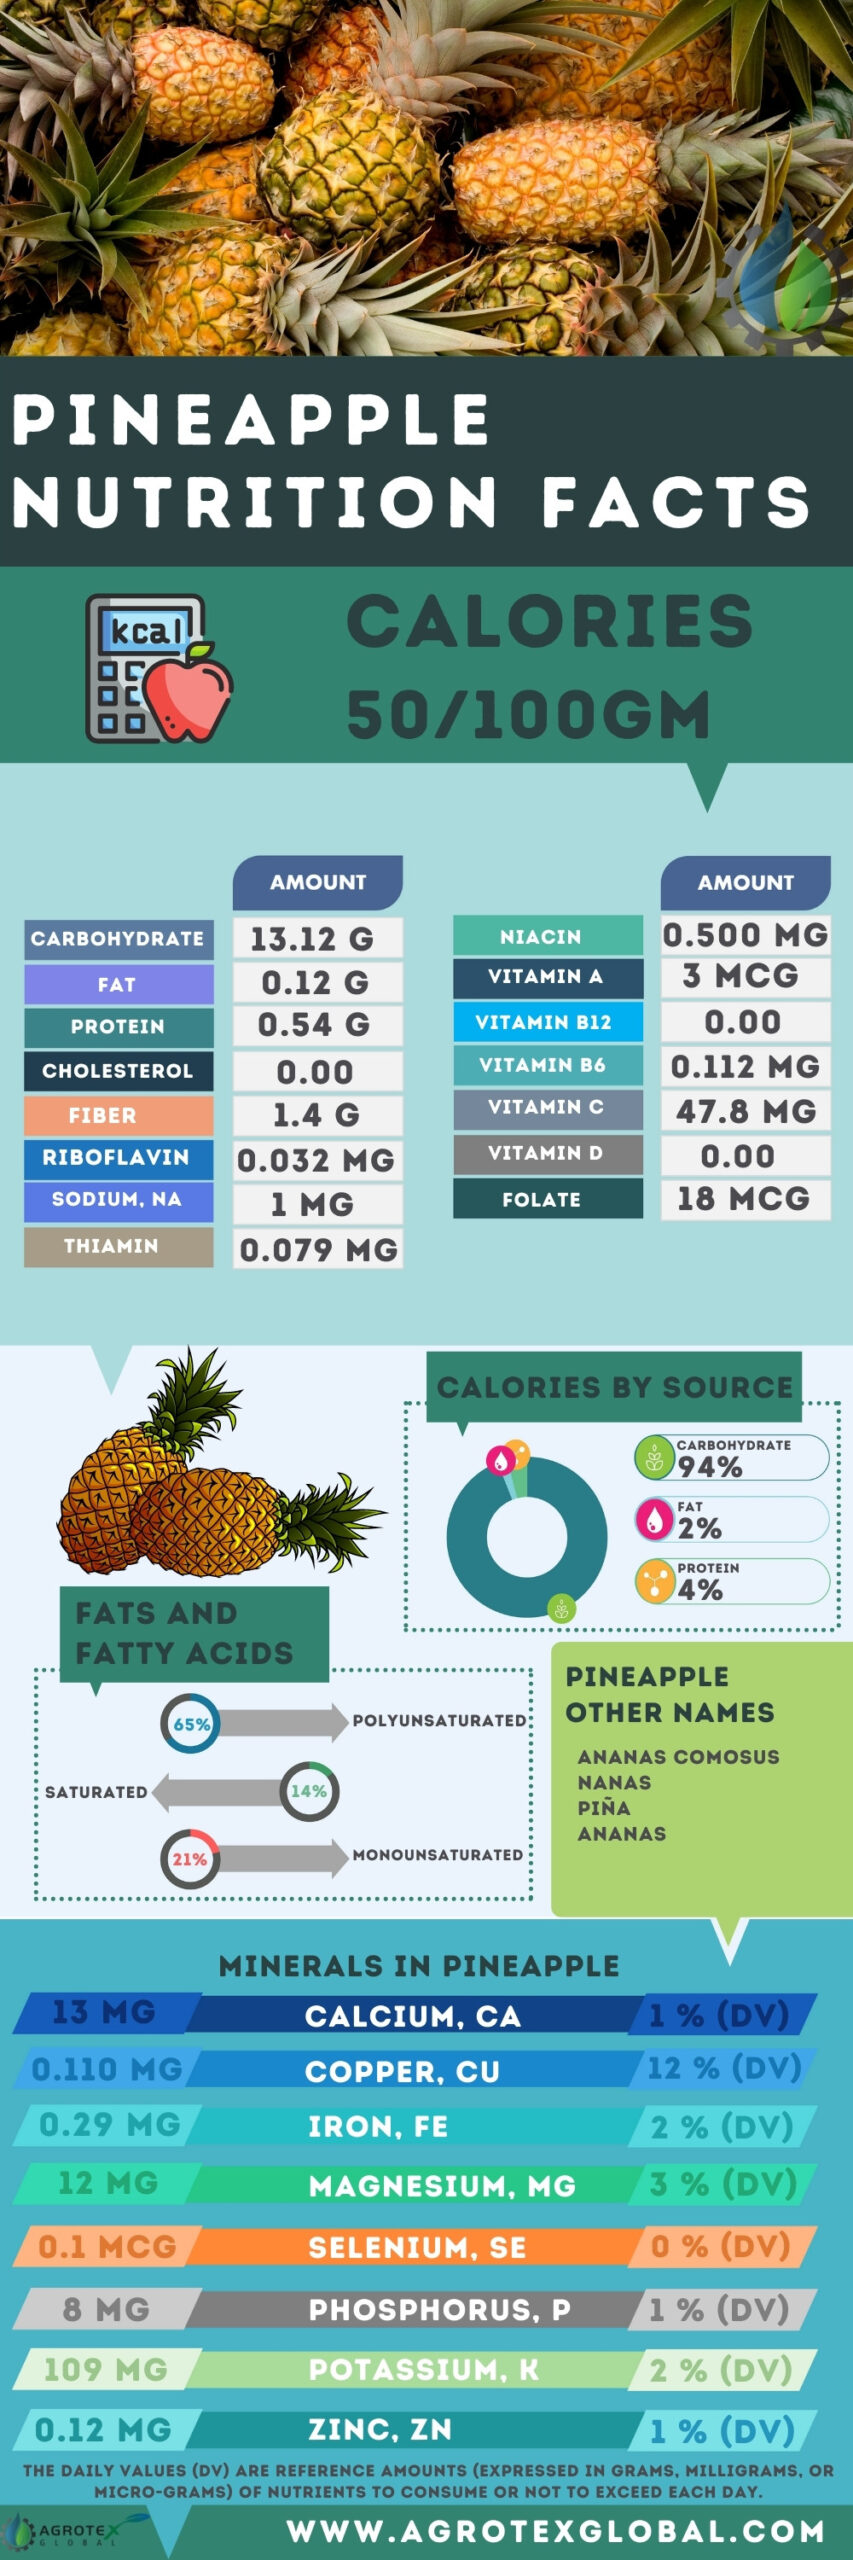 Pineapple NUTRITION FACTS calorie chart infographic